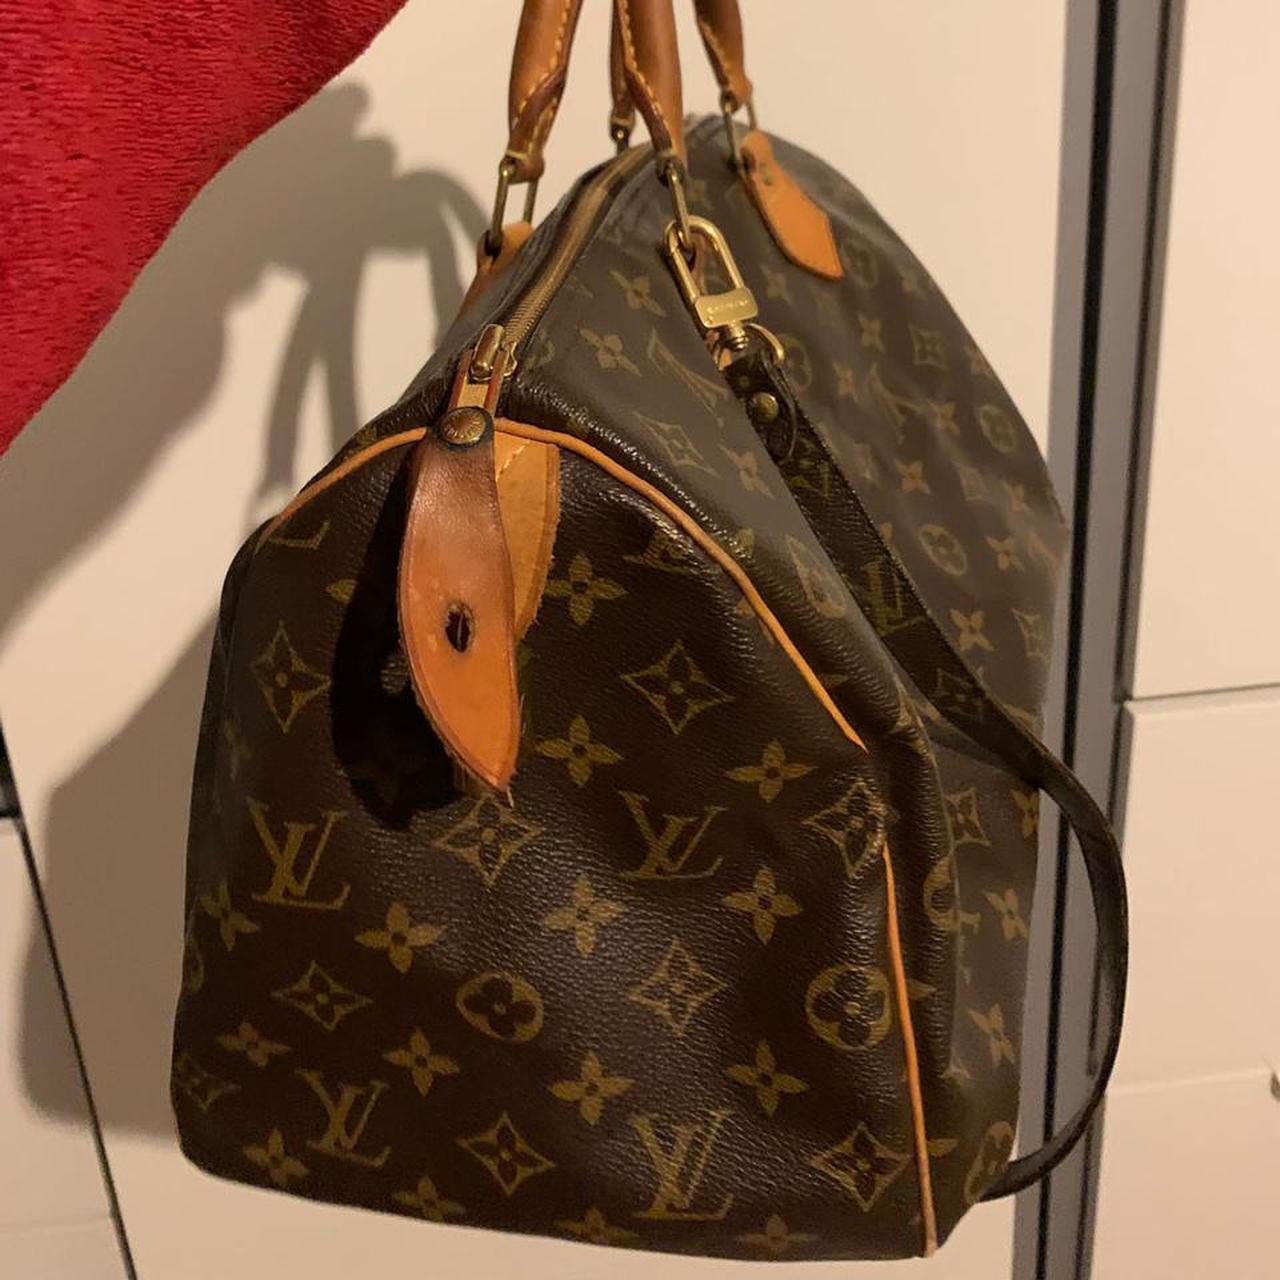 LV Purse - Quality purses with free shipping